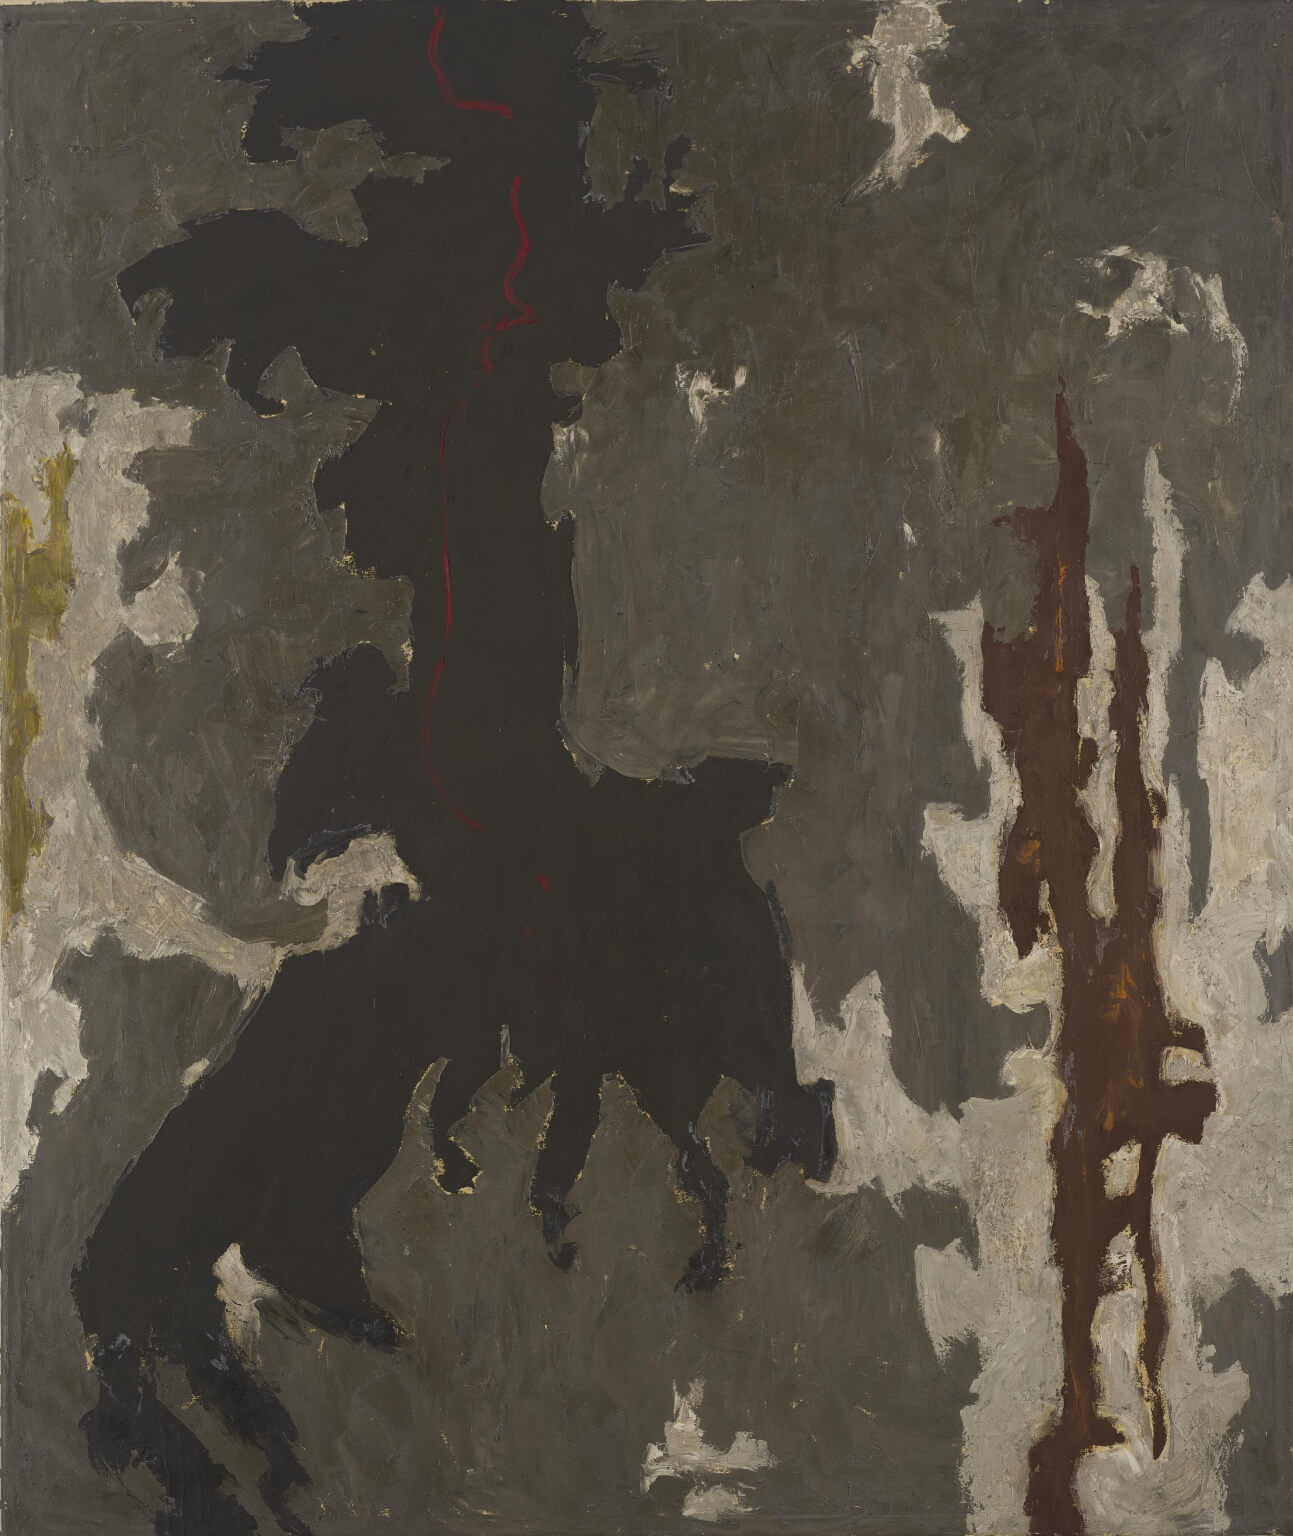 Abstract oil painting with background gray, a dark black figure, white splotches on both sides, and a brown vertical figure on the right side